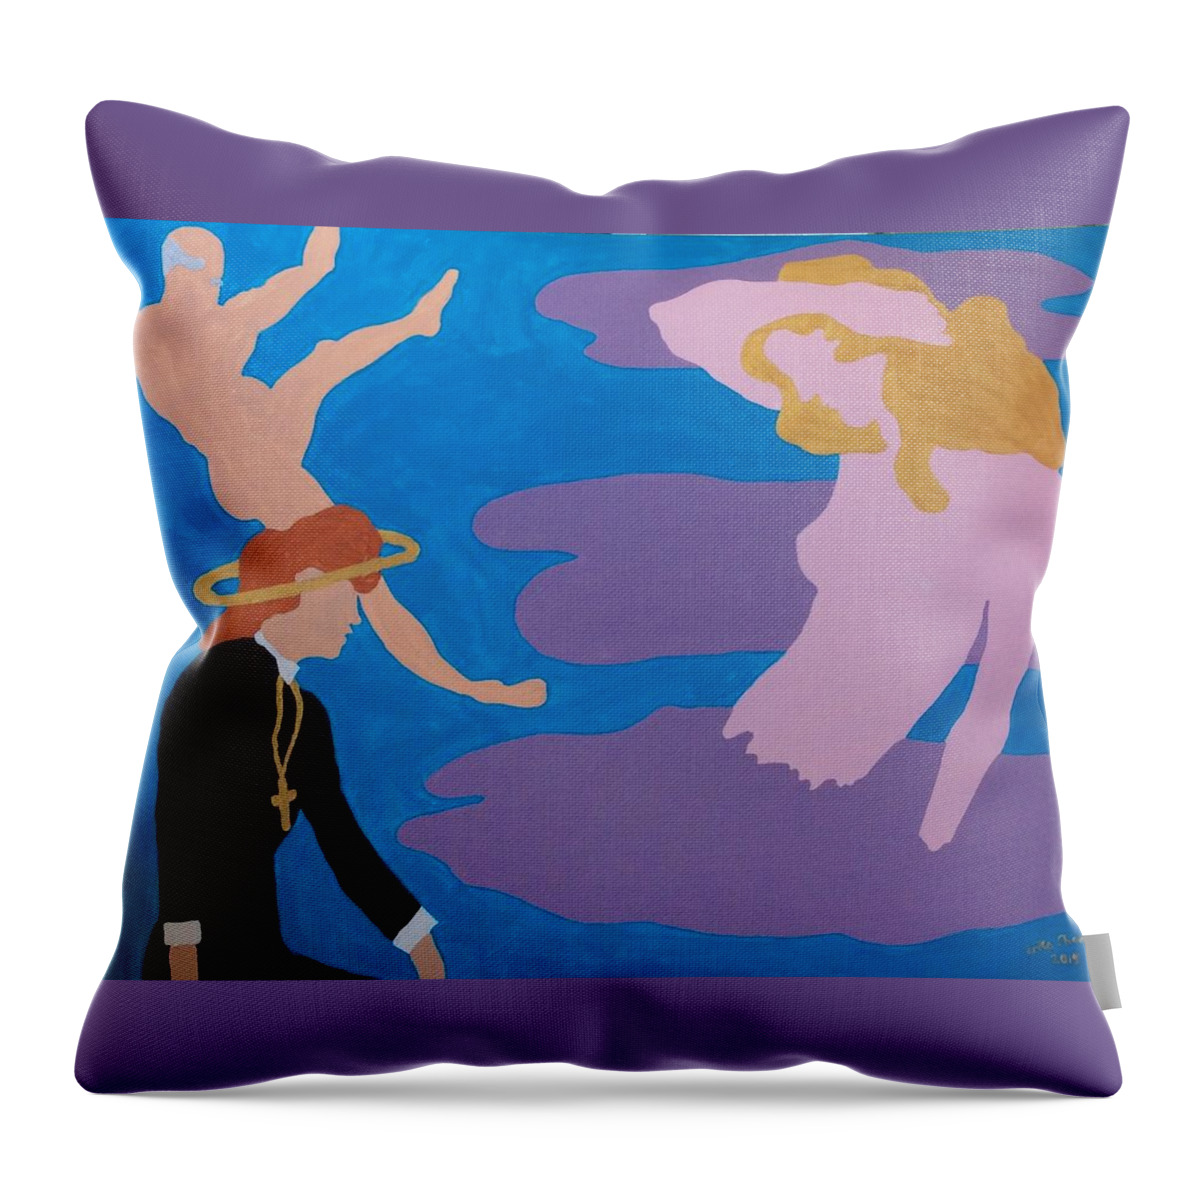 Therapists Throw Pillow featuring the painting Therapist by Erika Jean Chamberlin